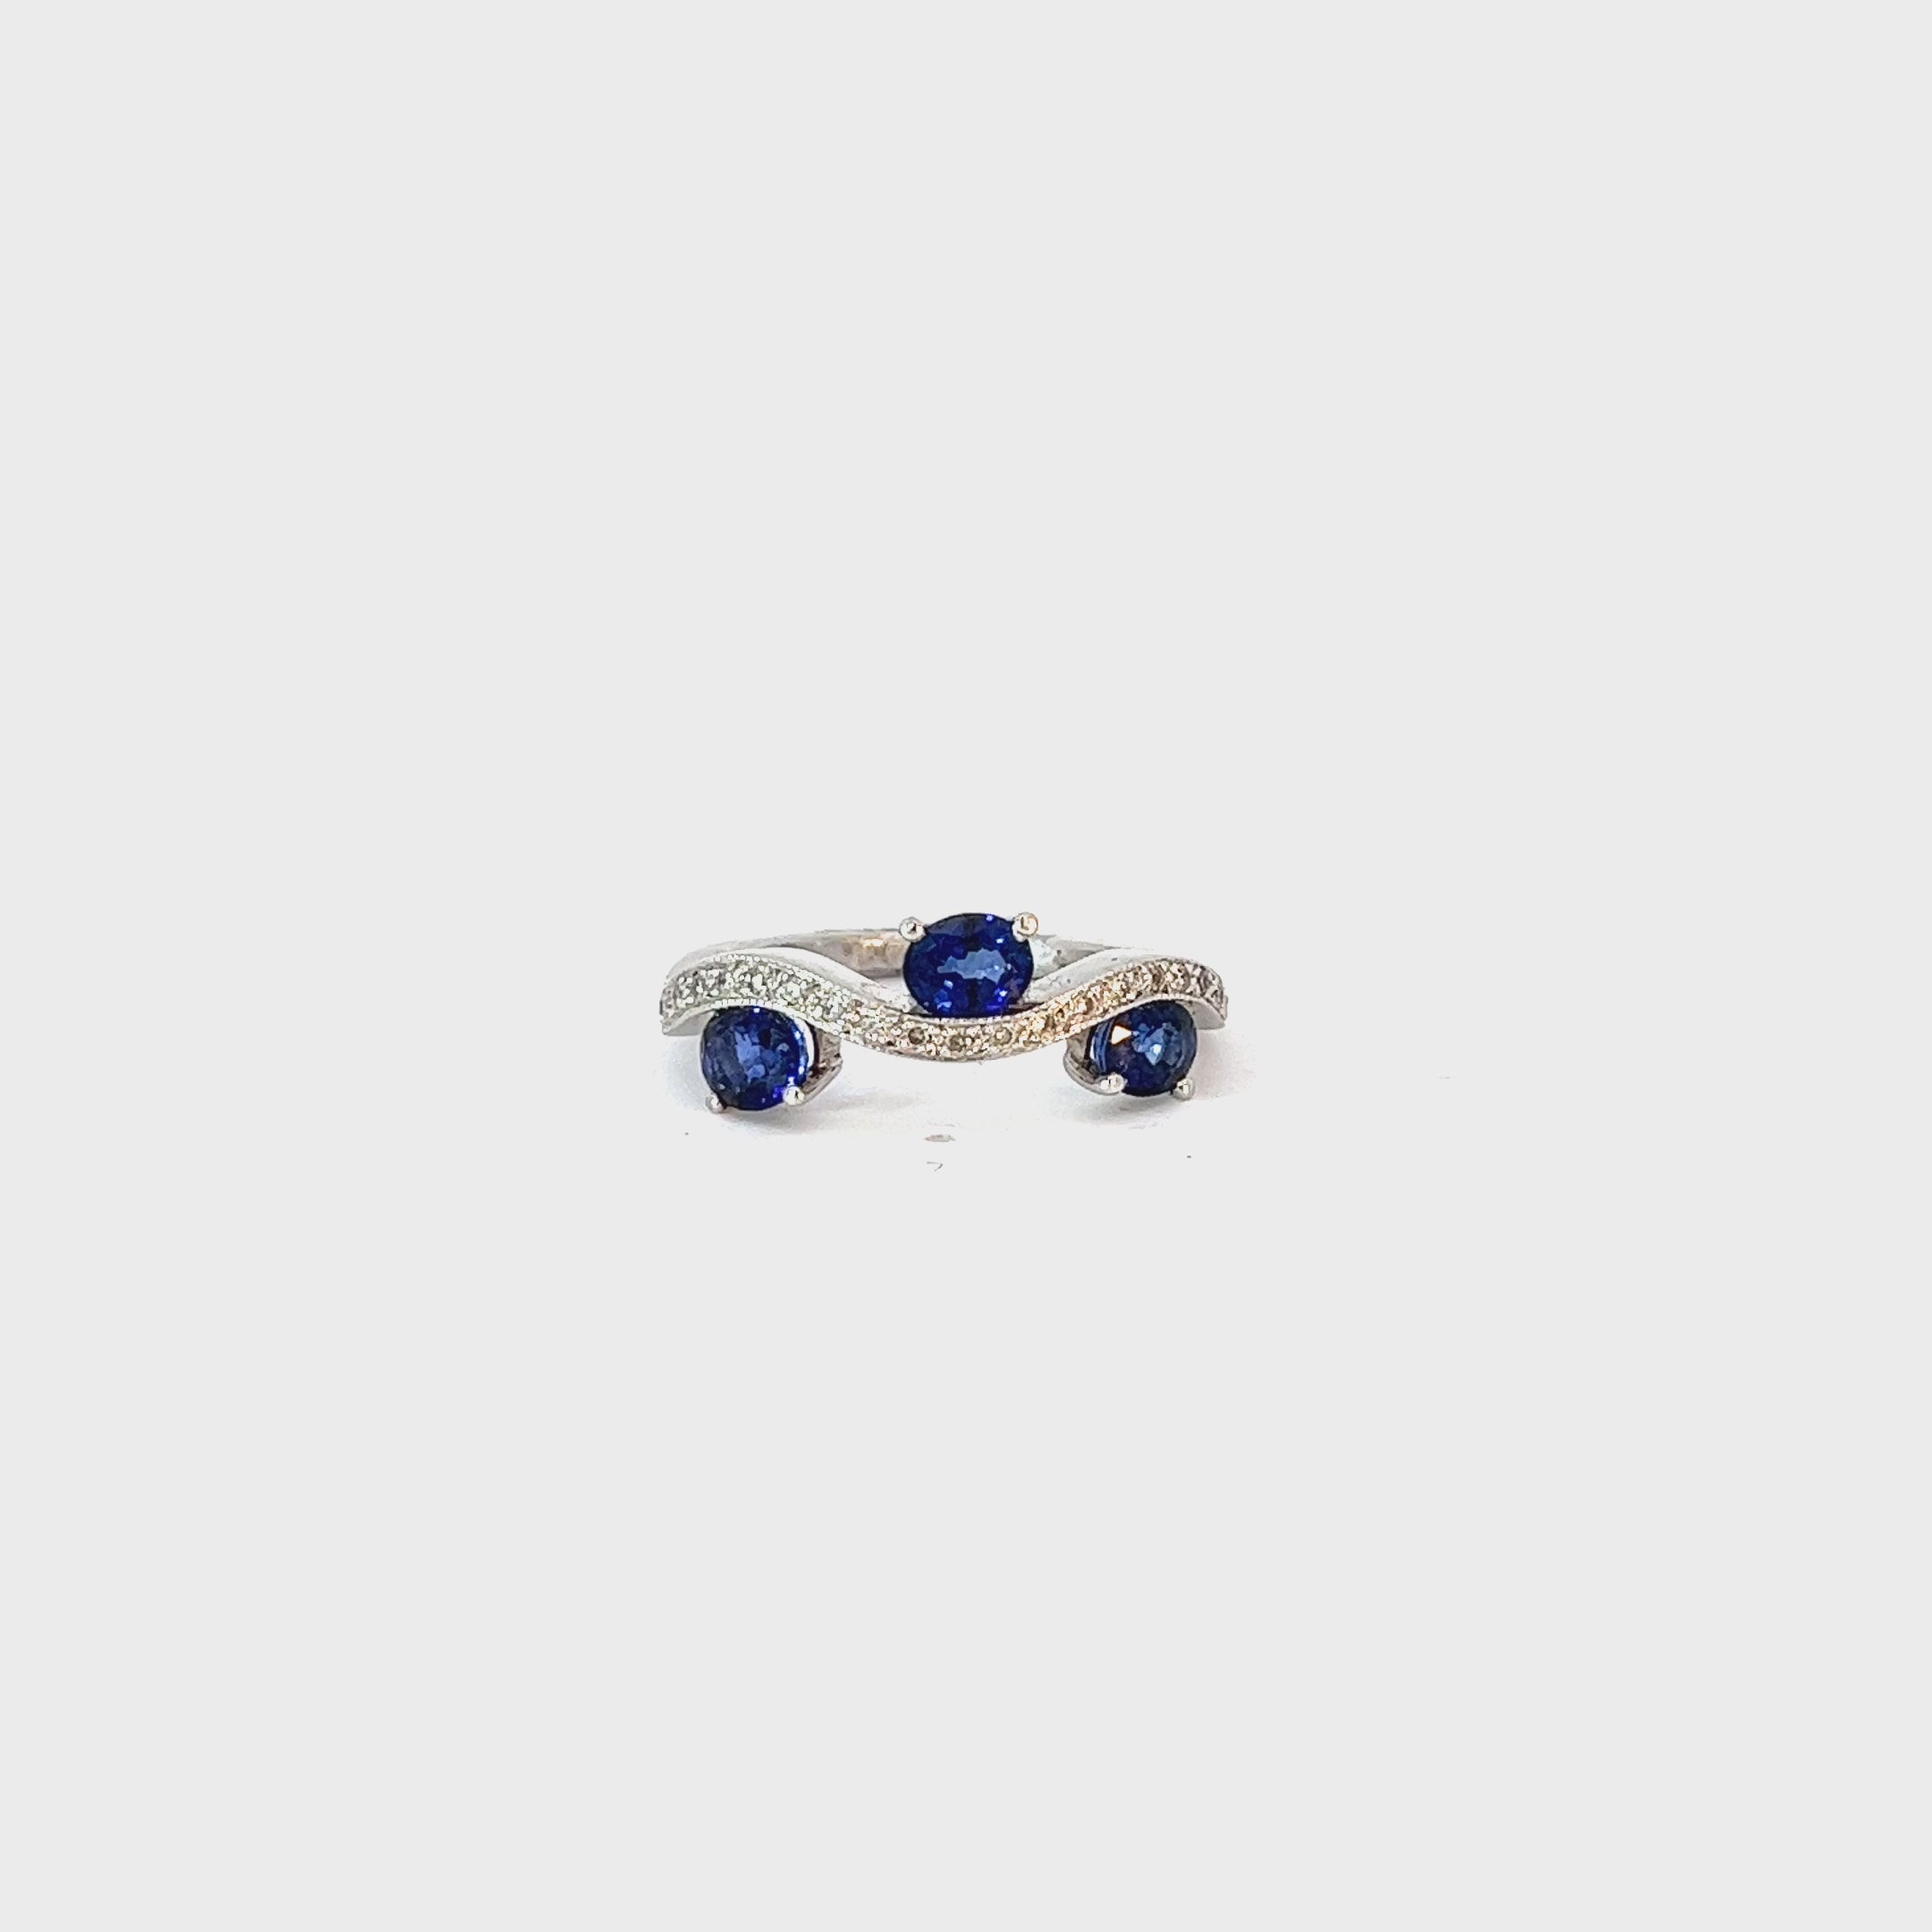 14k white gold 1.12ct Oval Blue Sapphire and surround by 1.13ct G SI1 Round Diamond ring